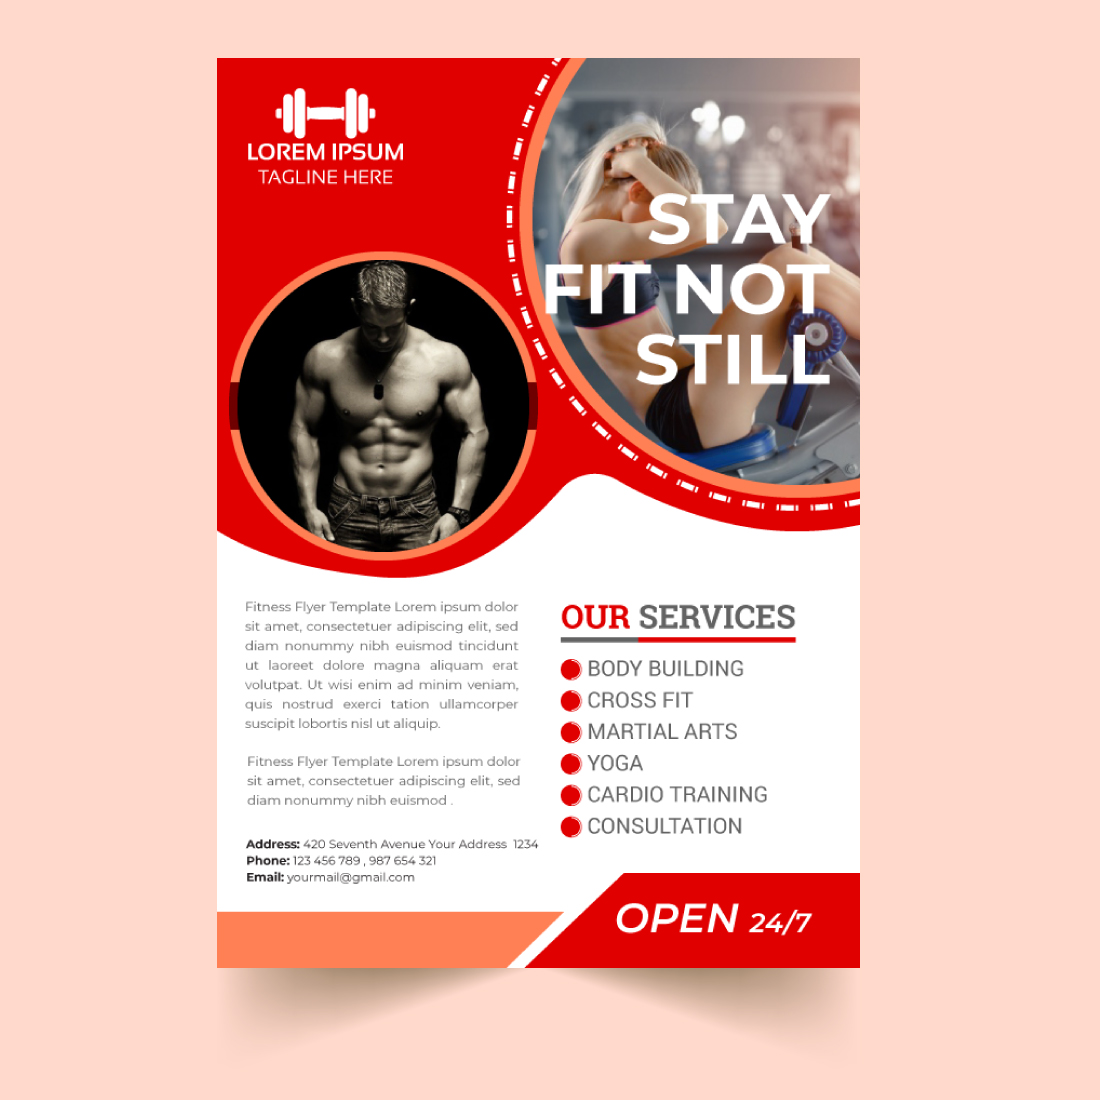 Fitness Flyer Template preview image.